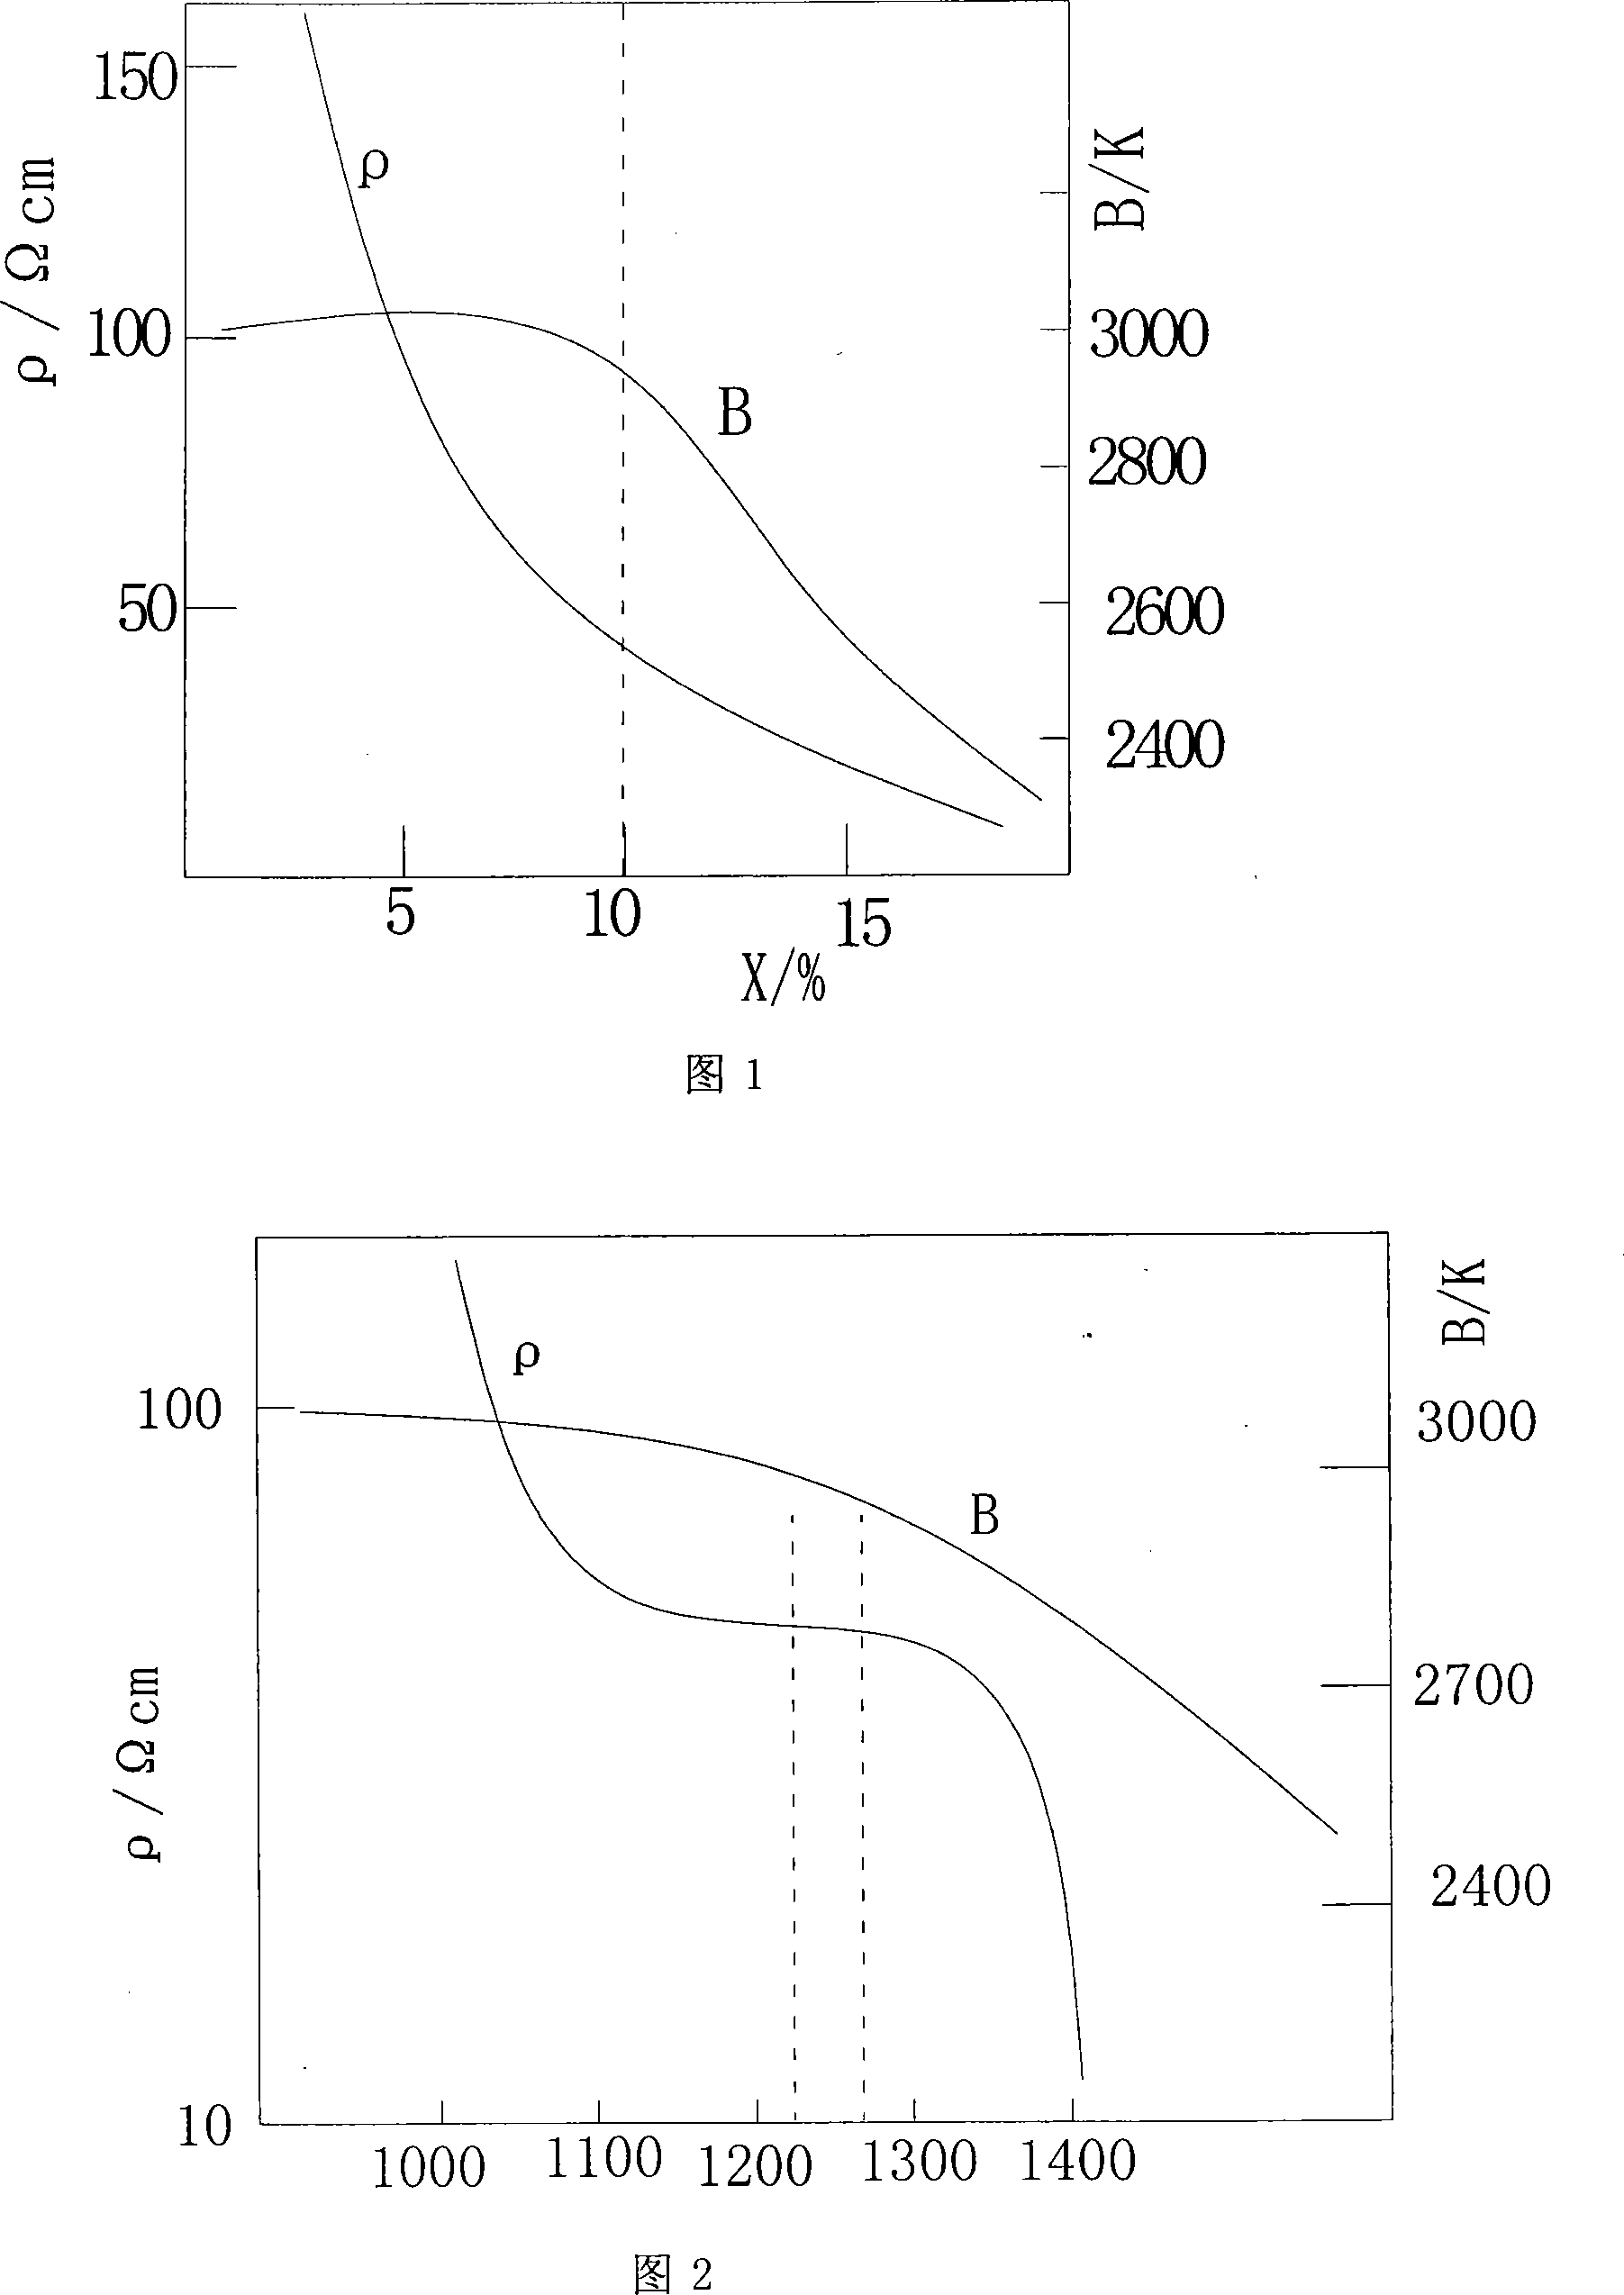 Low resistance/high B-value negative temperature coefficient thermo-sensitive material and method for preparing same